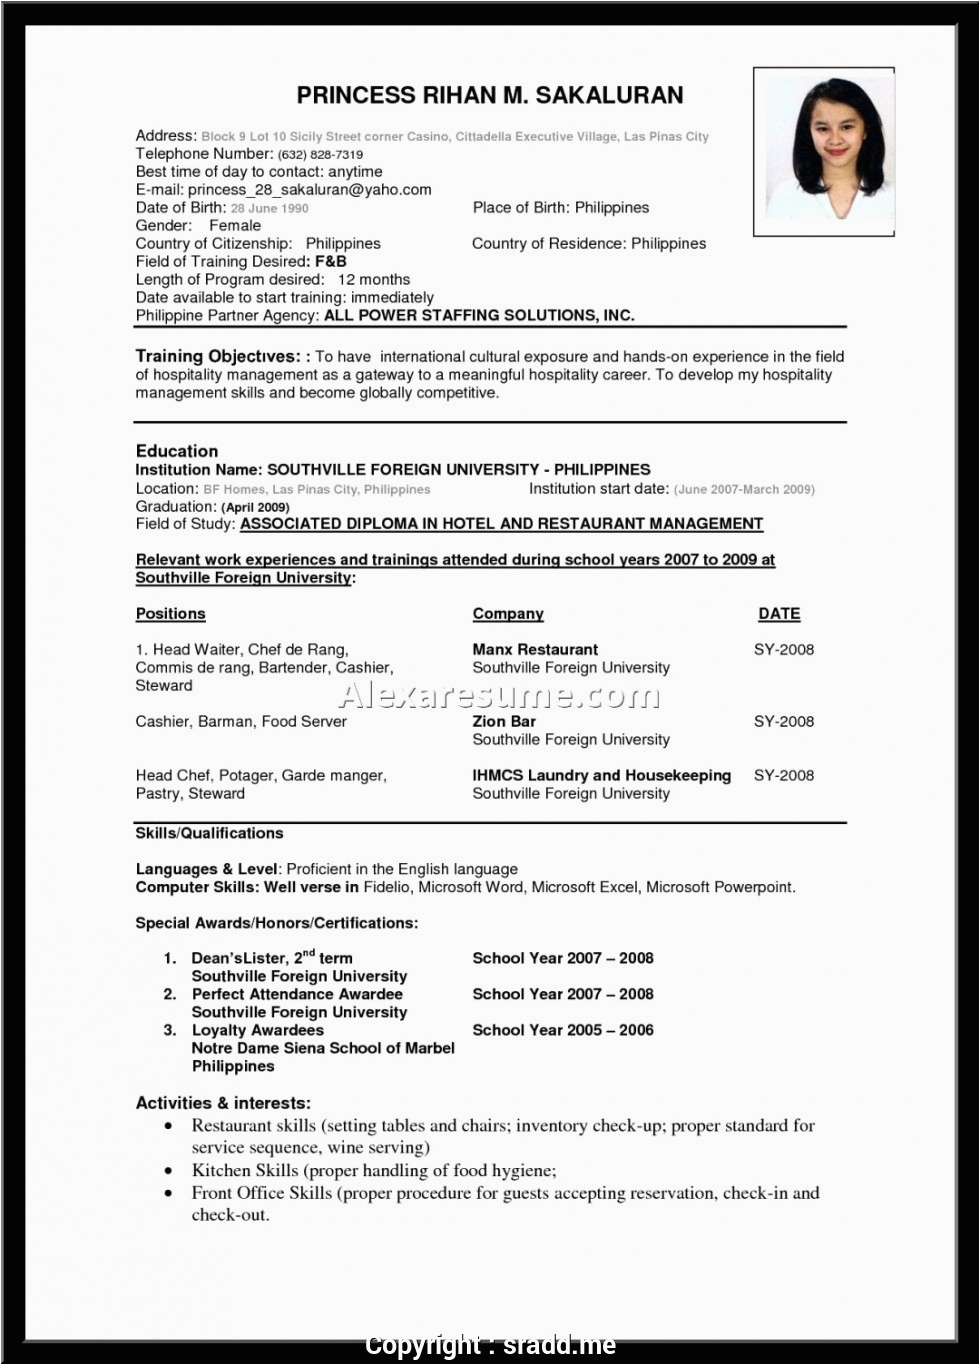 Sample Resume format for Hotel Industry Unique Resume for Hotelier Sample Resume format for Hotel